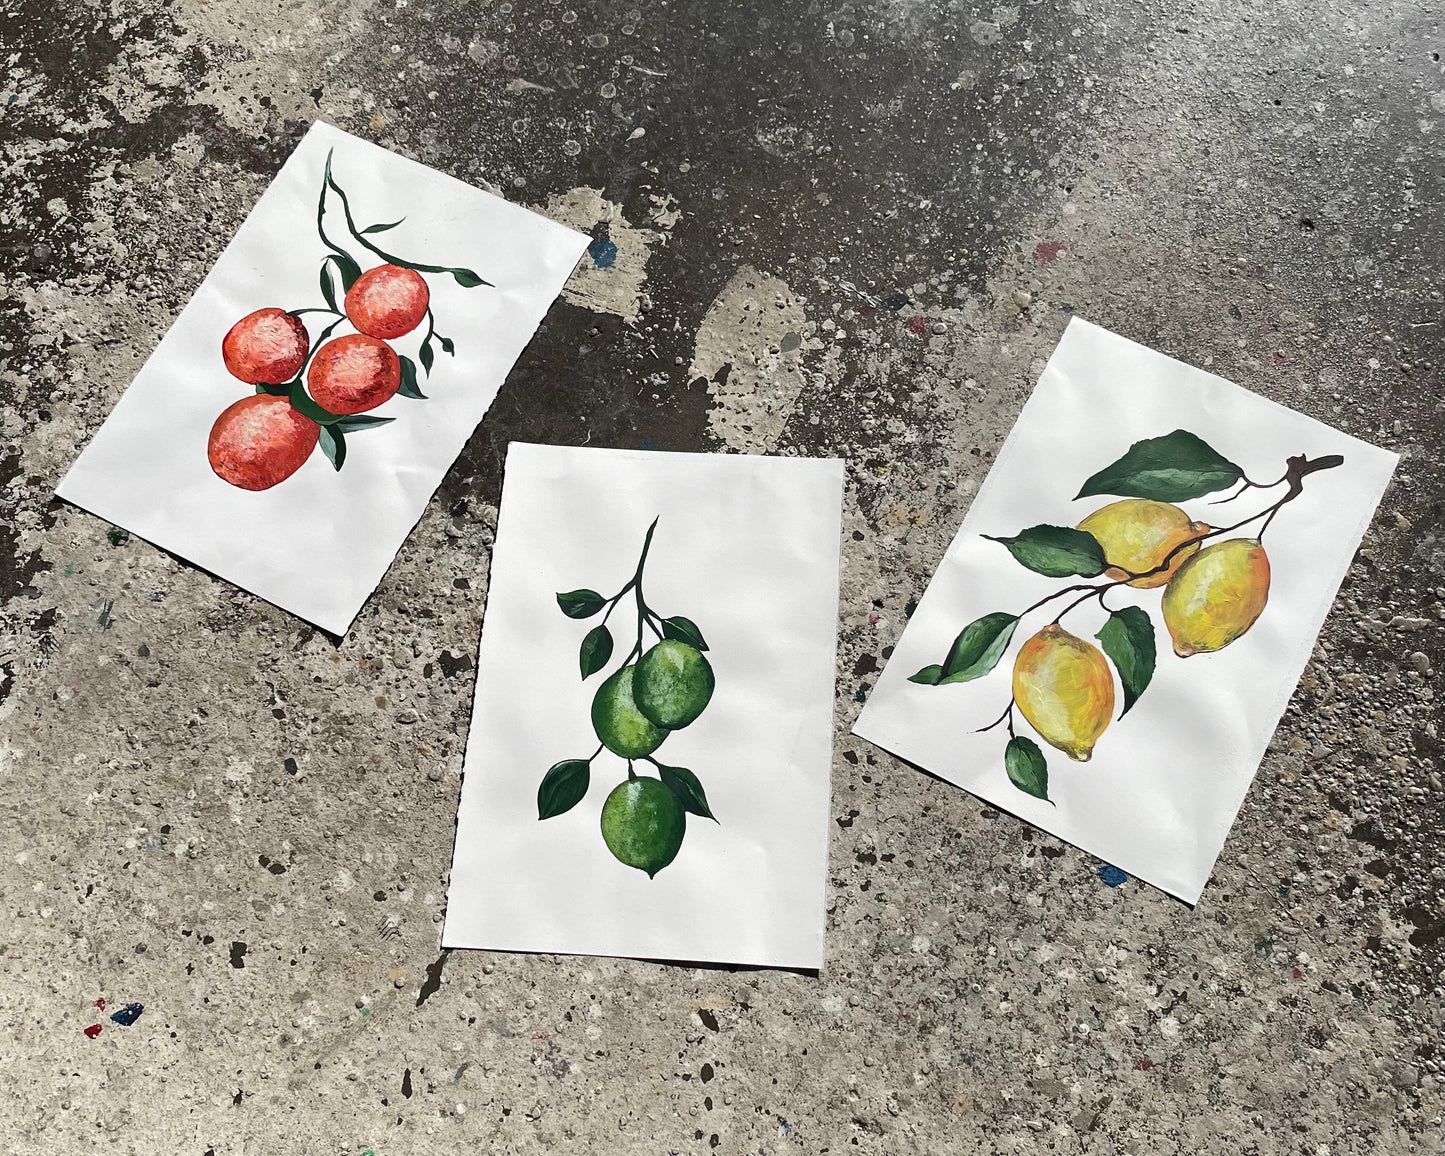 Tuscany Citrus Prints: A Series by Maree Quinn